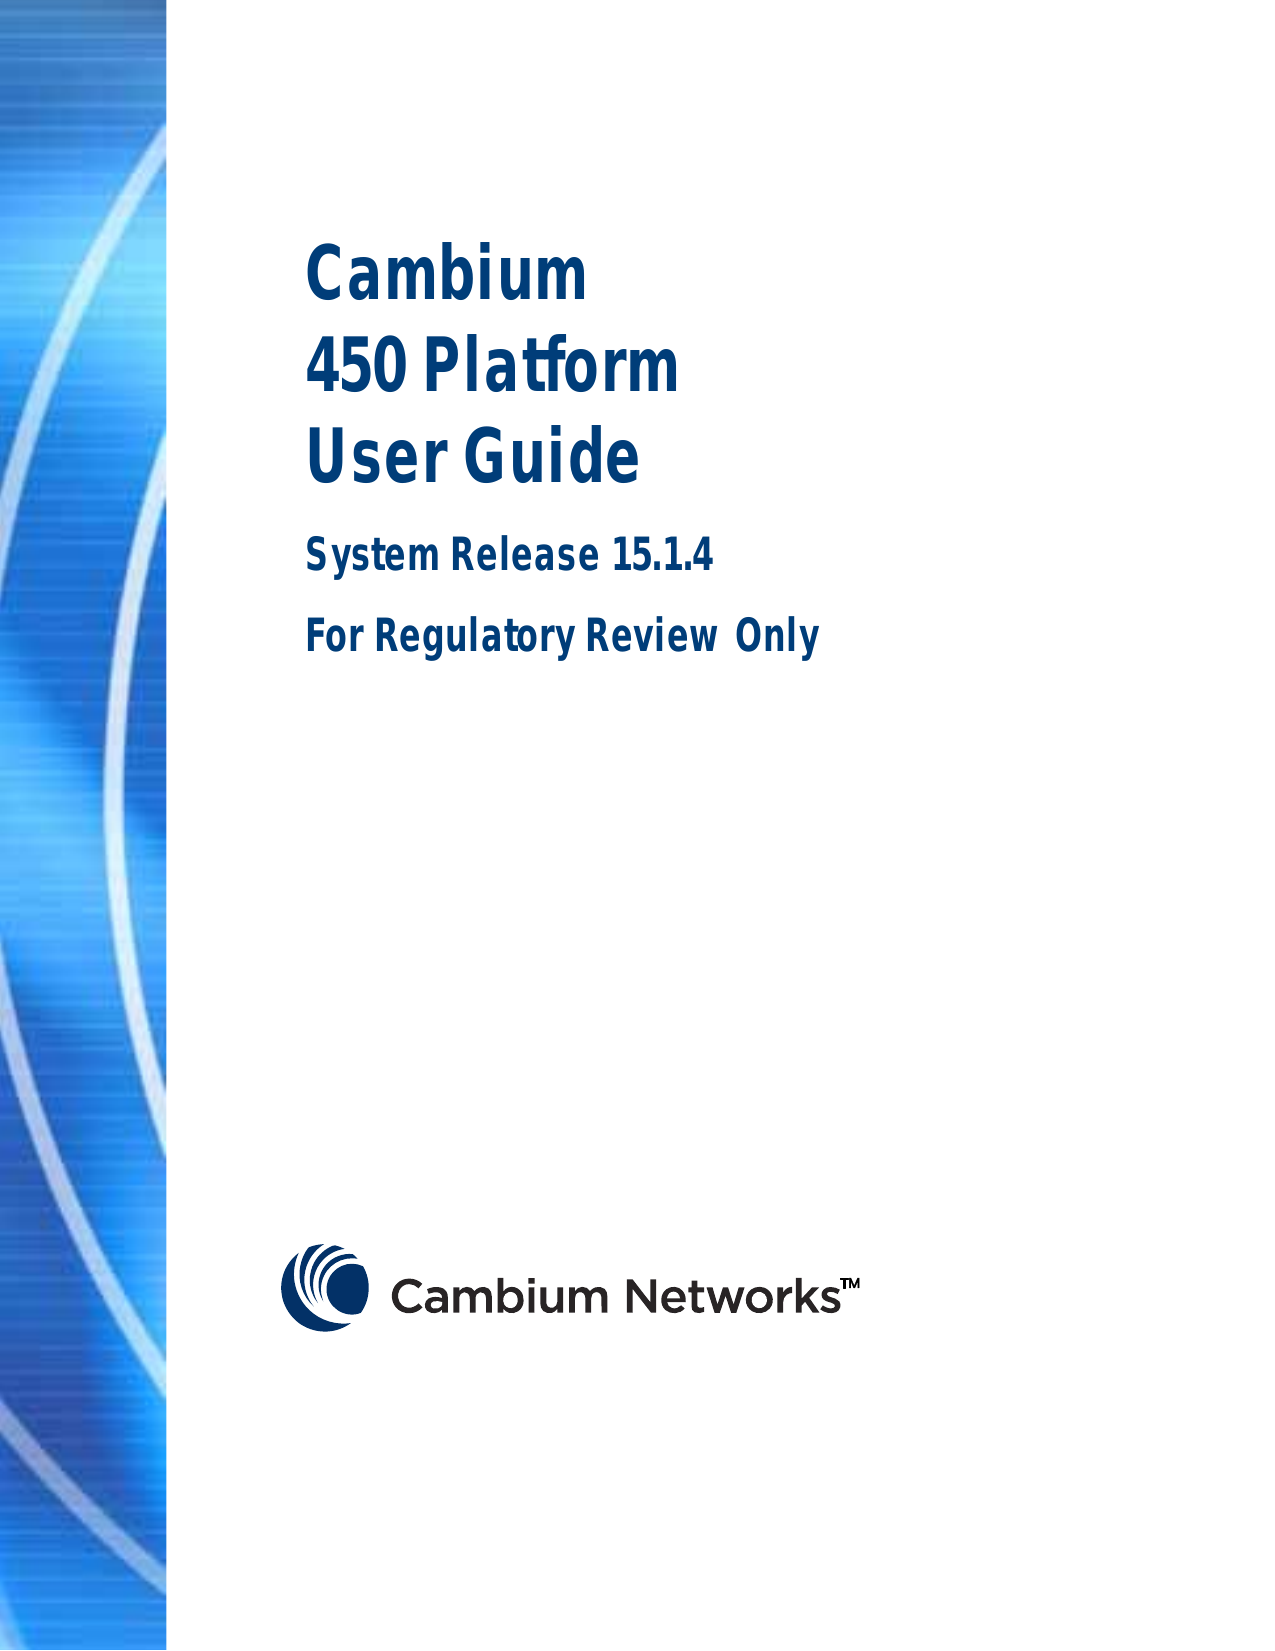  33F  Cambium  450 Platform  User Guide System Release 15.1.4 For Regulatory Review Only                  pass  